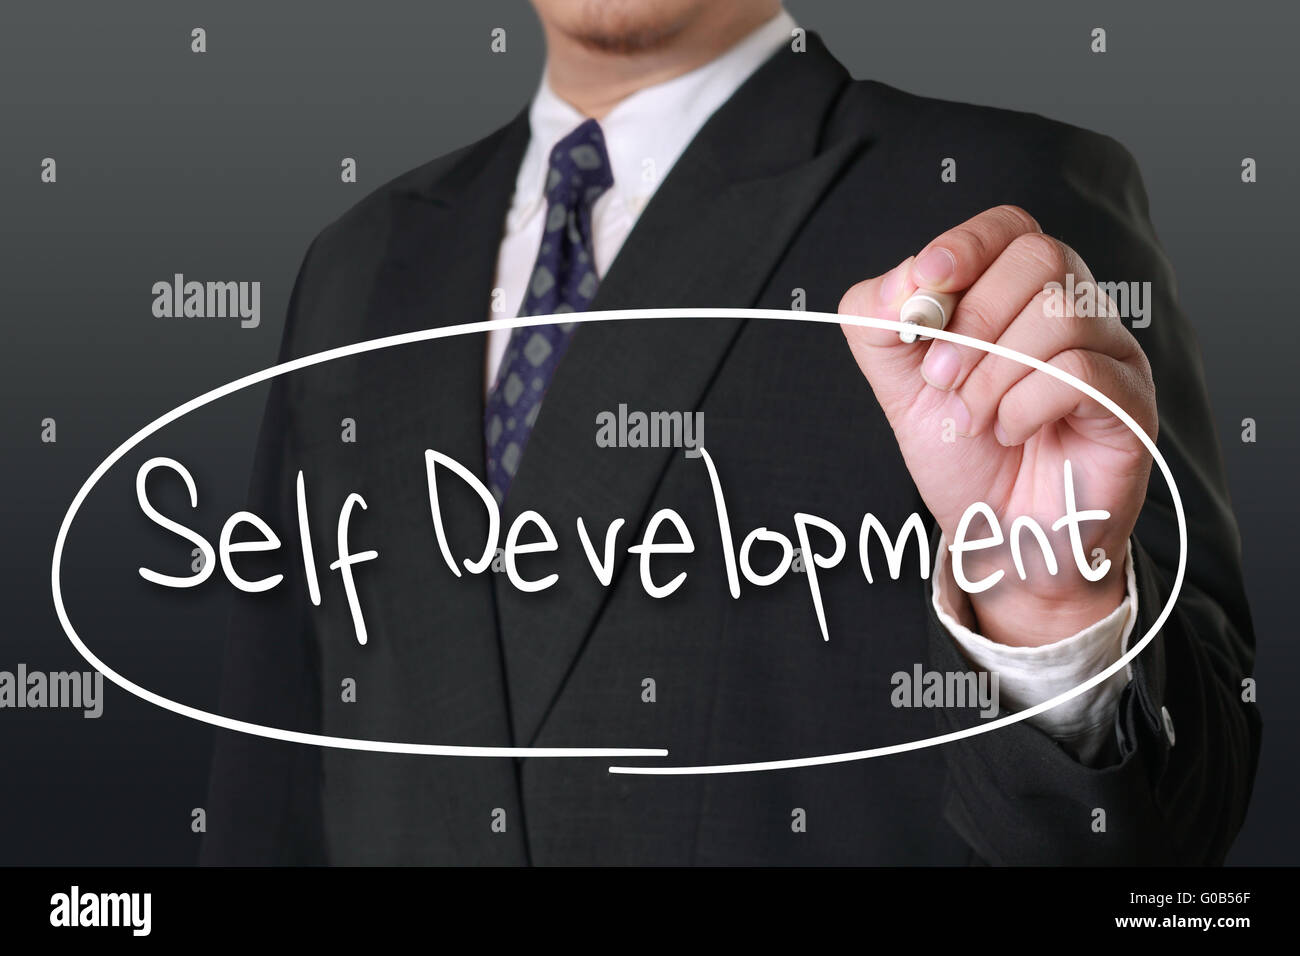 Motivational business concept, image of a businessman holding marker and write Self Development words Stock Photo